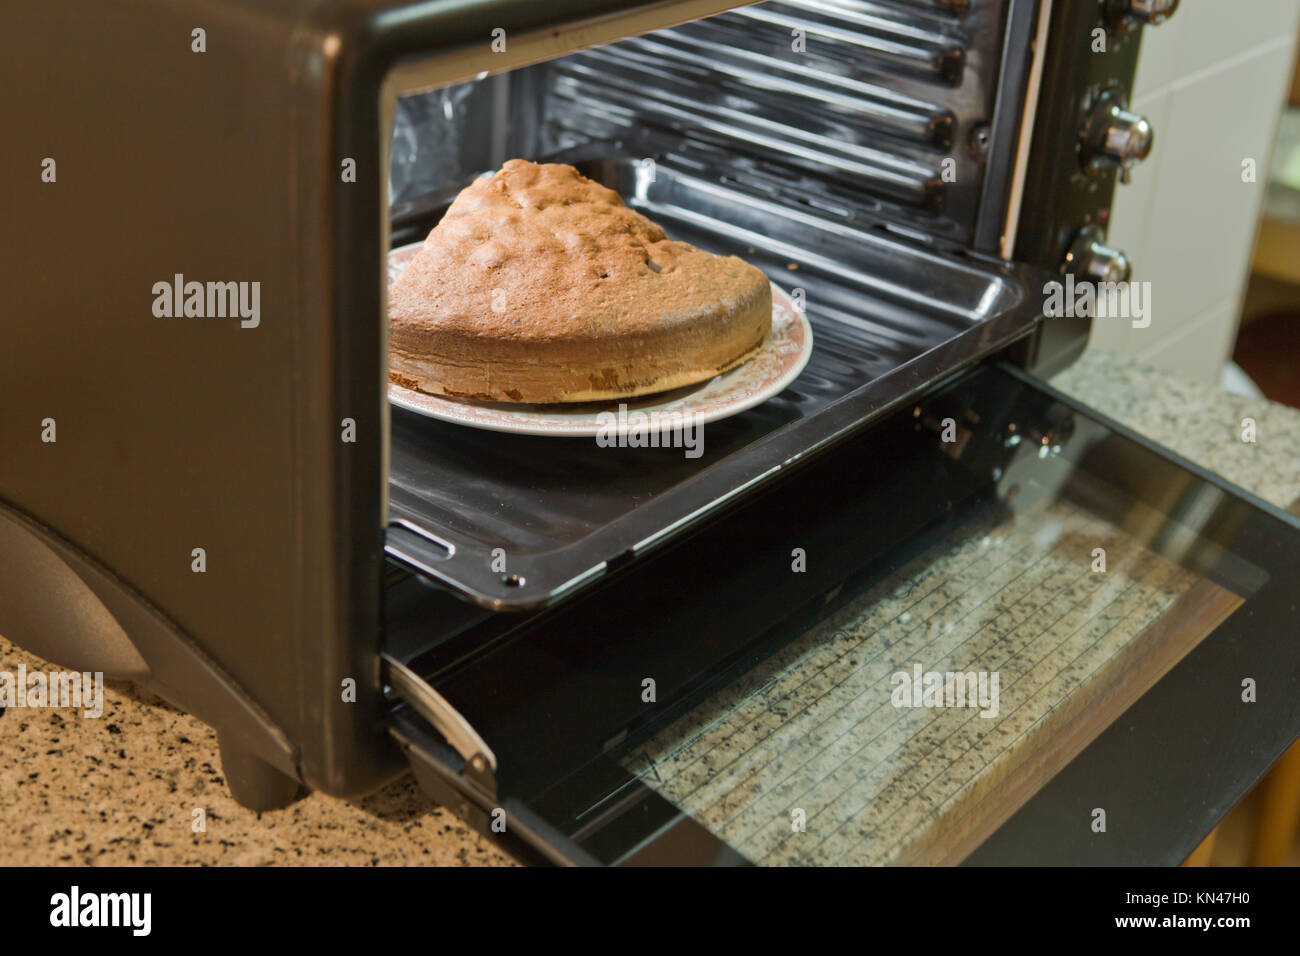 Closeup of a homemade cake in baking tin in open oven. Stock Photo